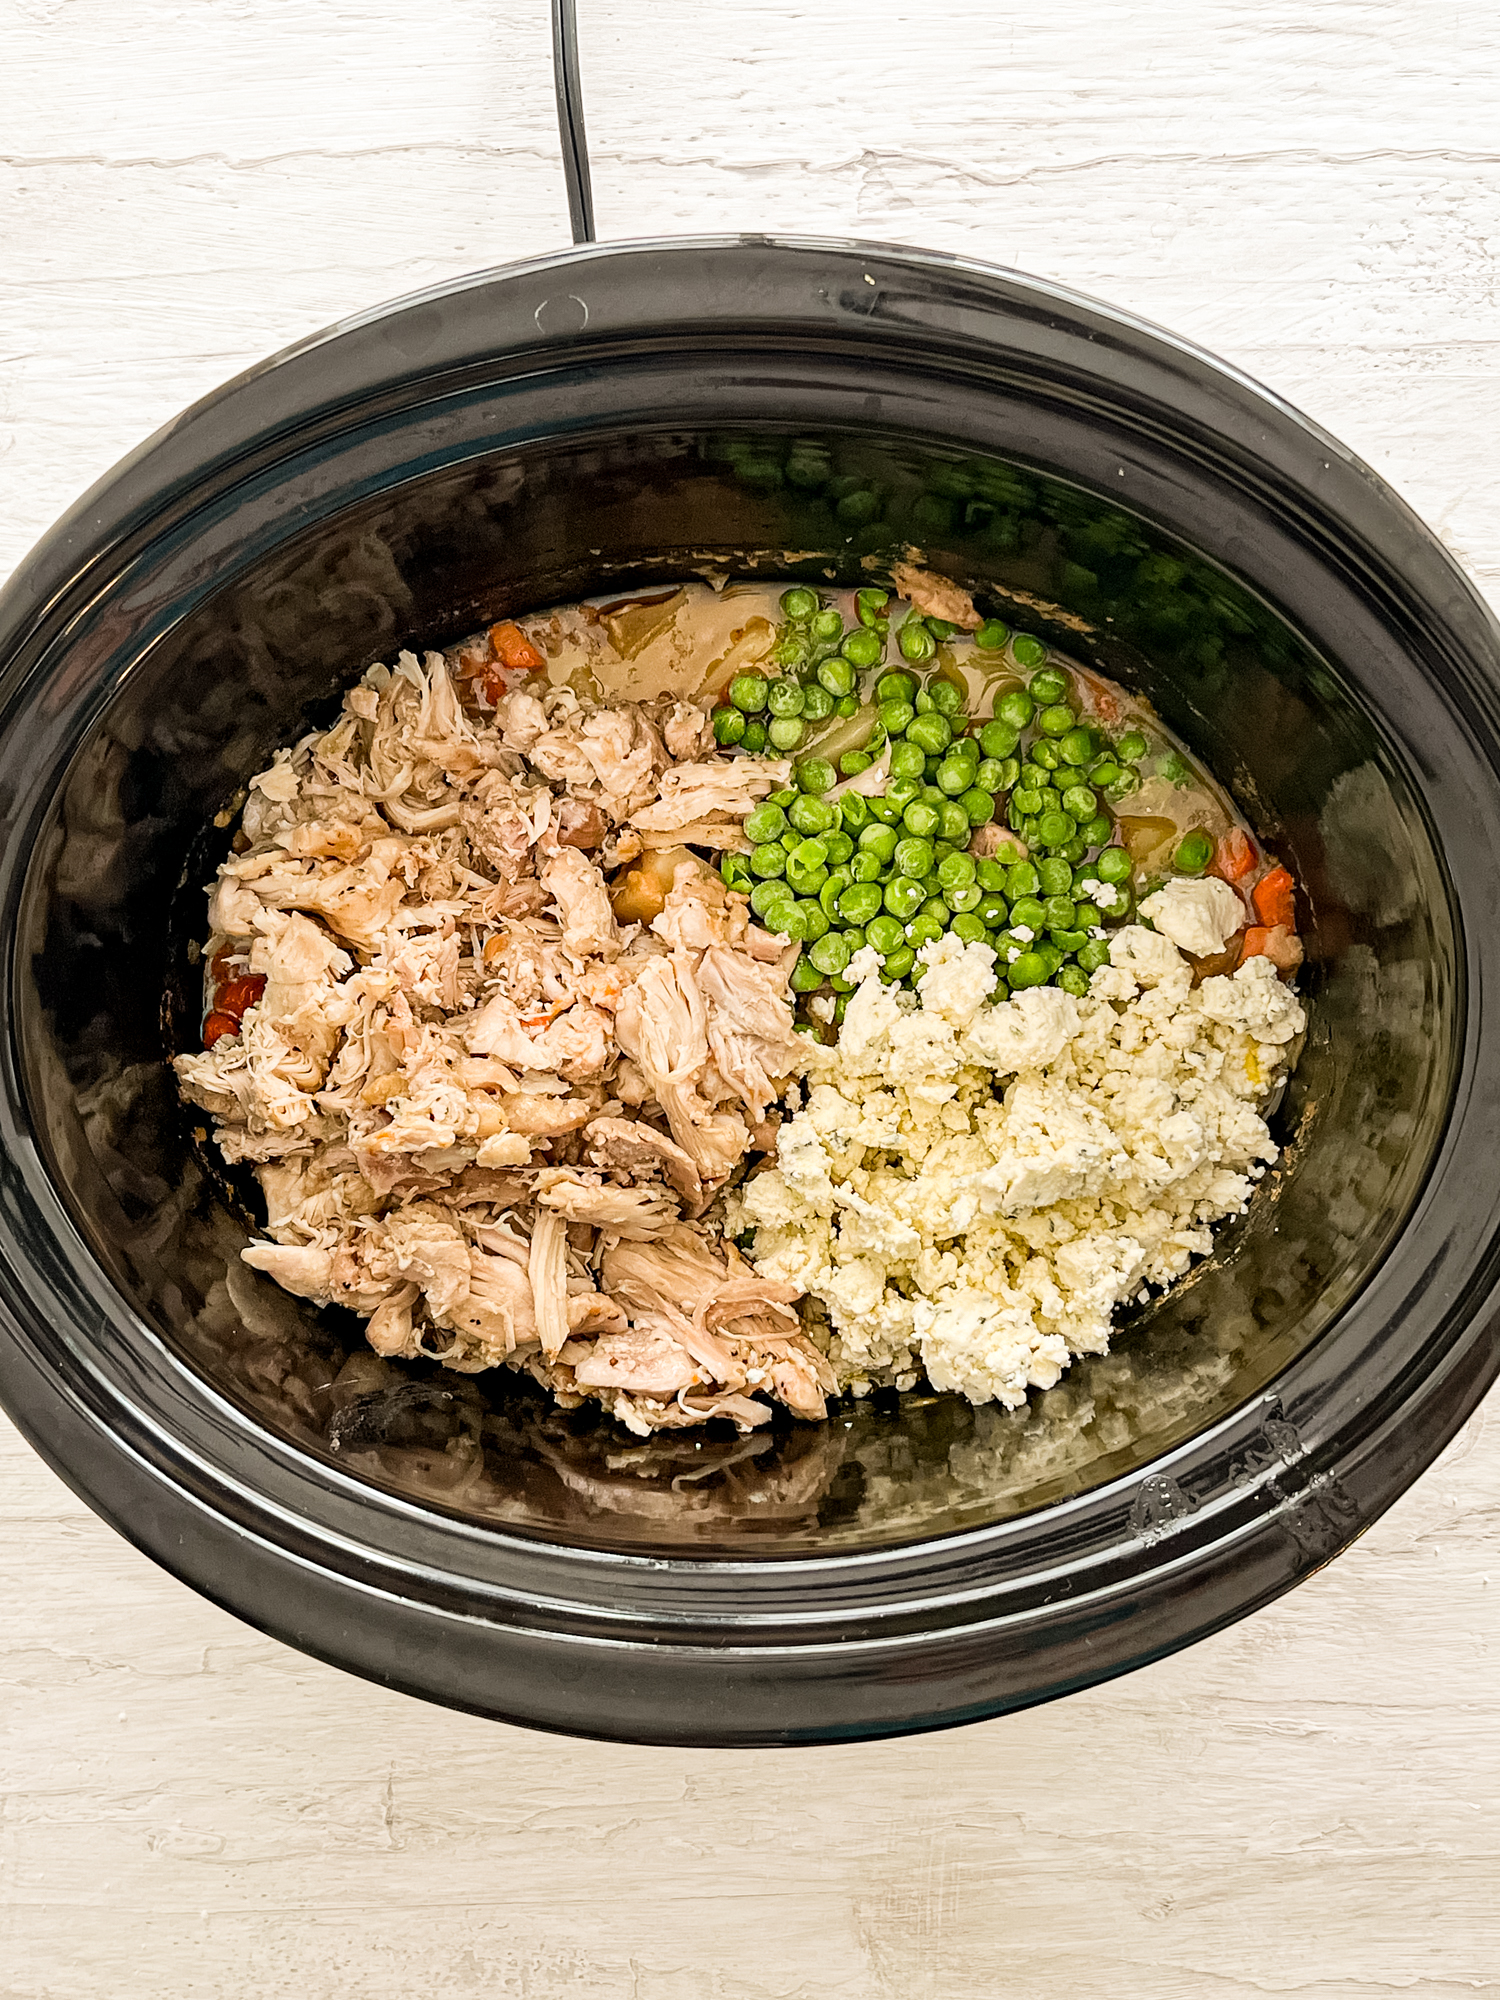 Shredded chicken, crumbled Boursin cheese, sauteed veggies, and frozen peas in a slow cooker.